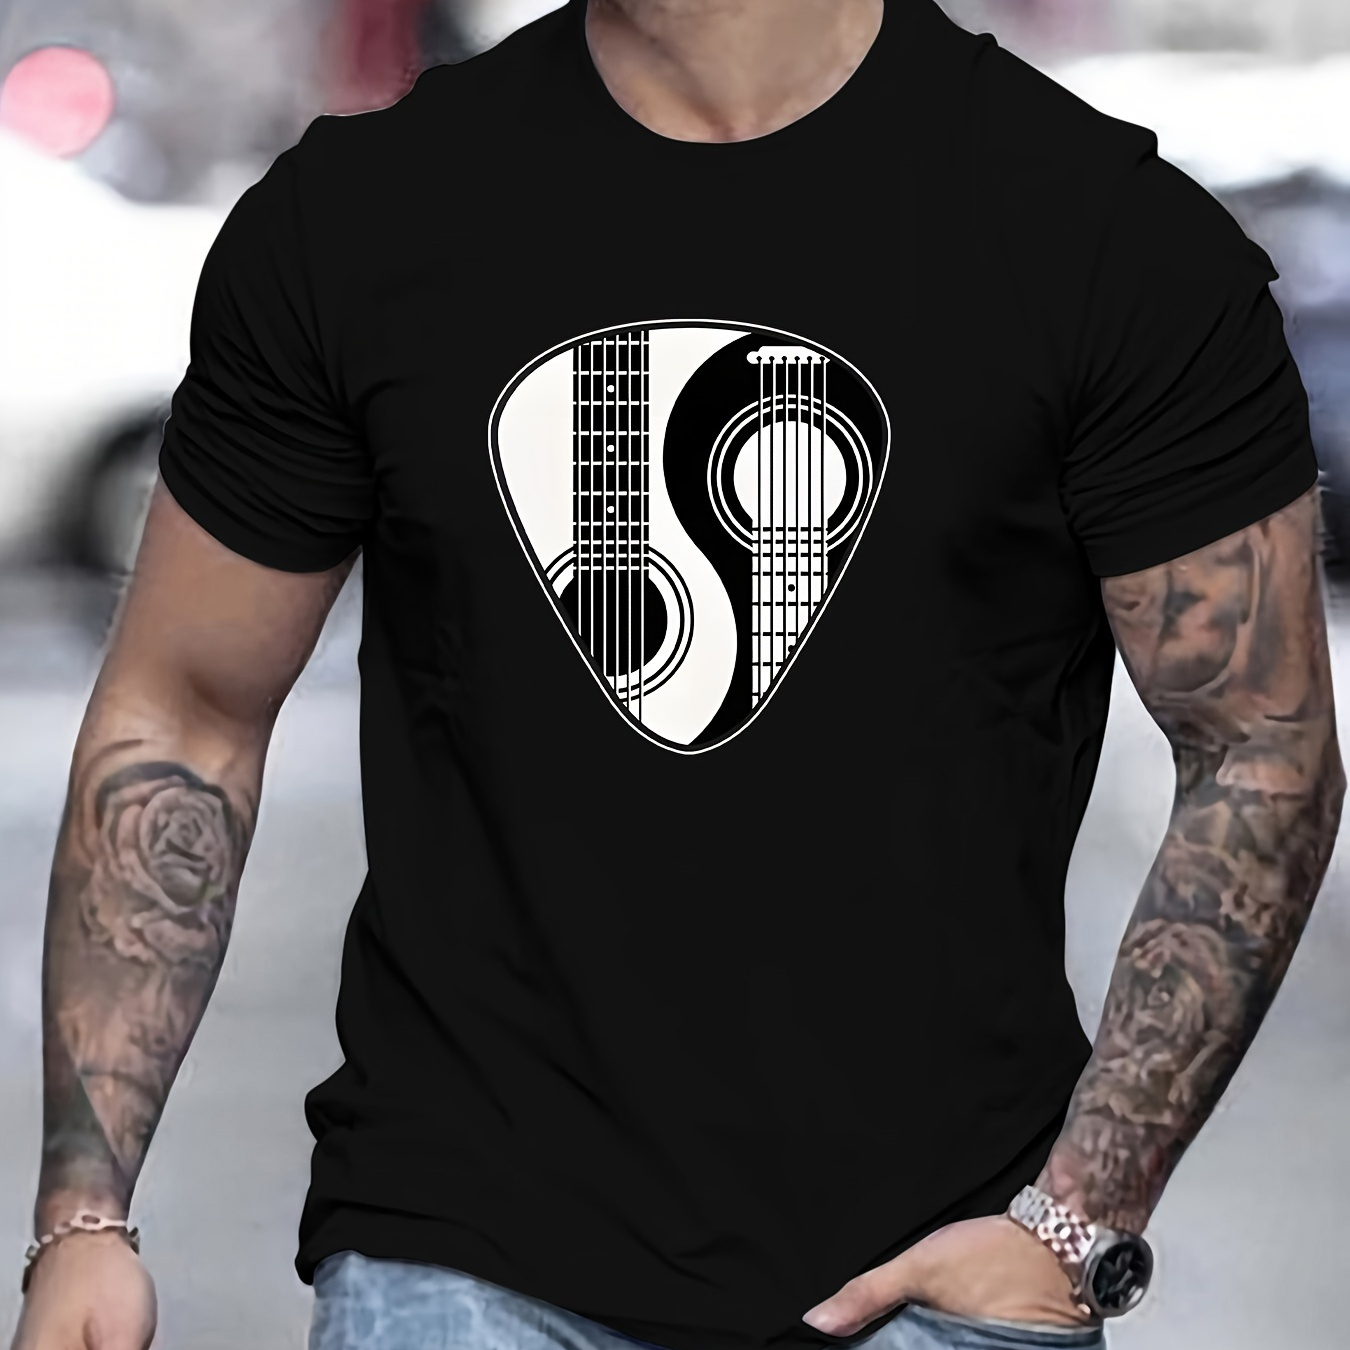 

Stylish Guitar Graphic Print Men's Creative Top, Casual Short Sleeve Crew Neck T-shirt, Men's Clothing For Summer Outdoor